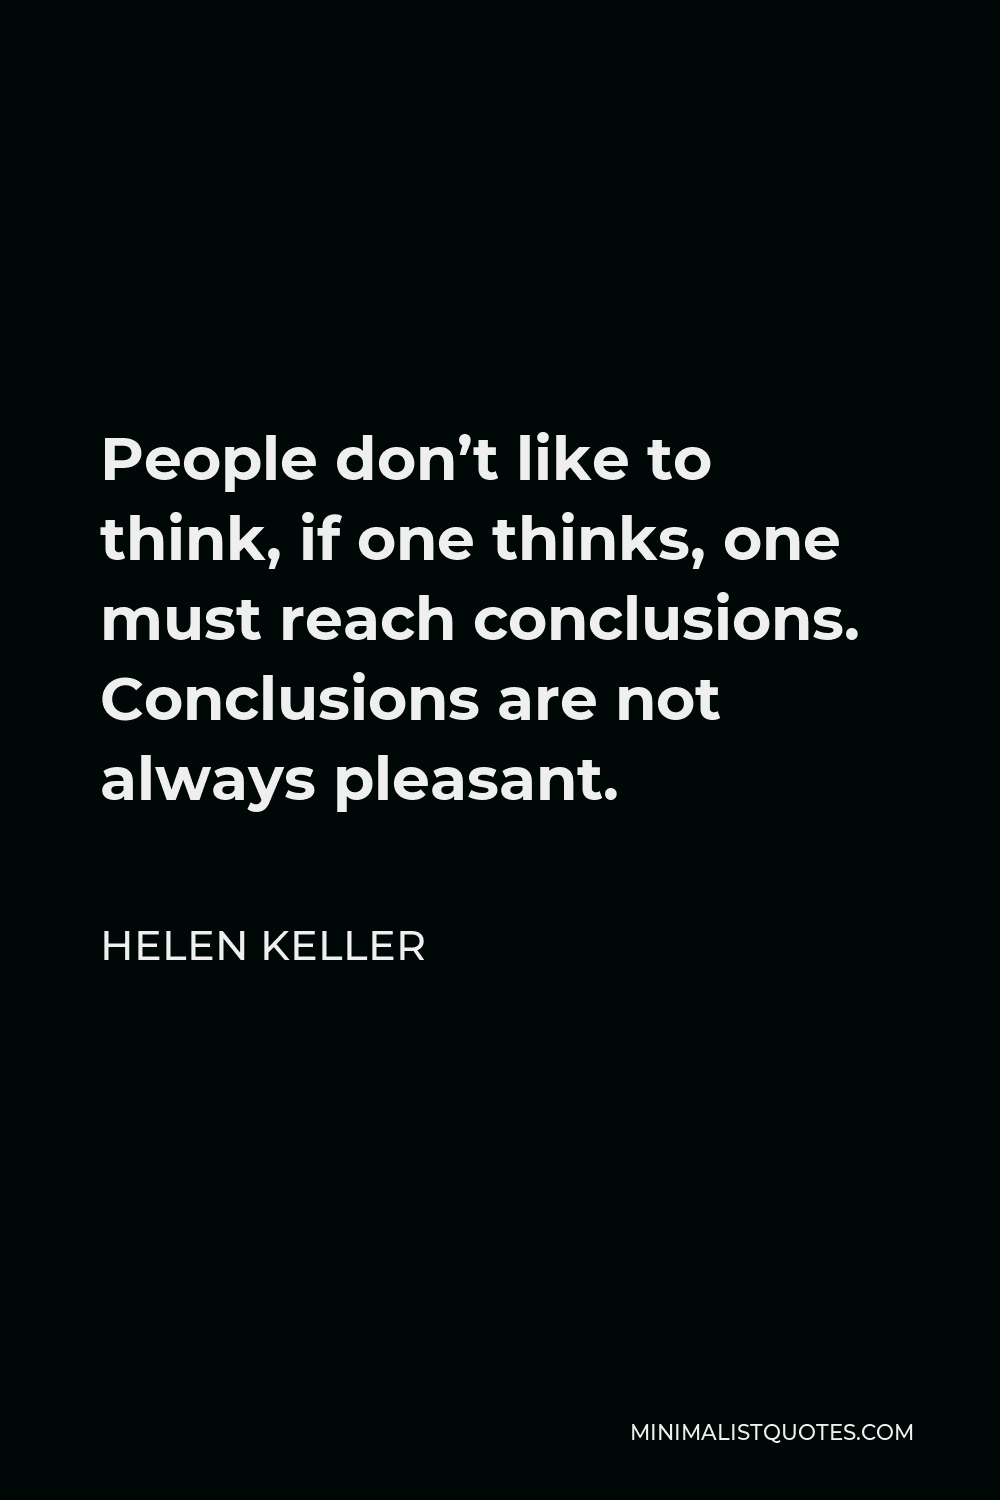 Helen Keller Quote - People don’t like to think, if one thinks, one must reach conclusions. Conclusions are not always pleasant.